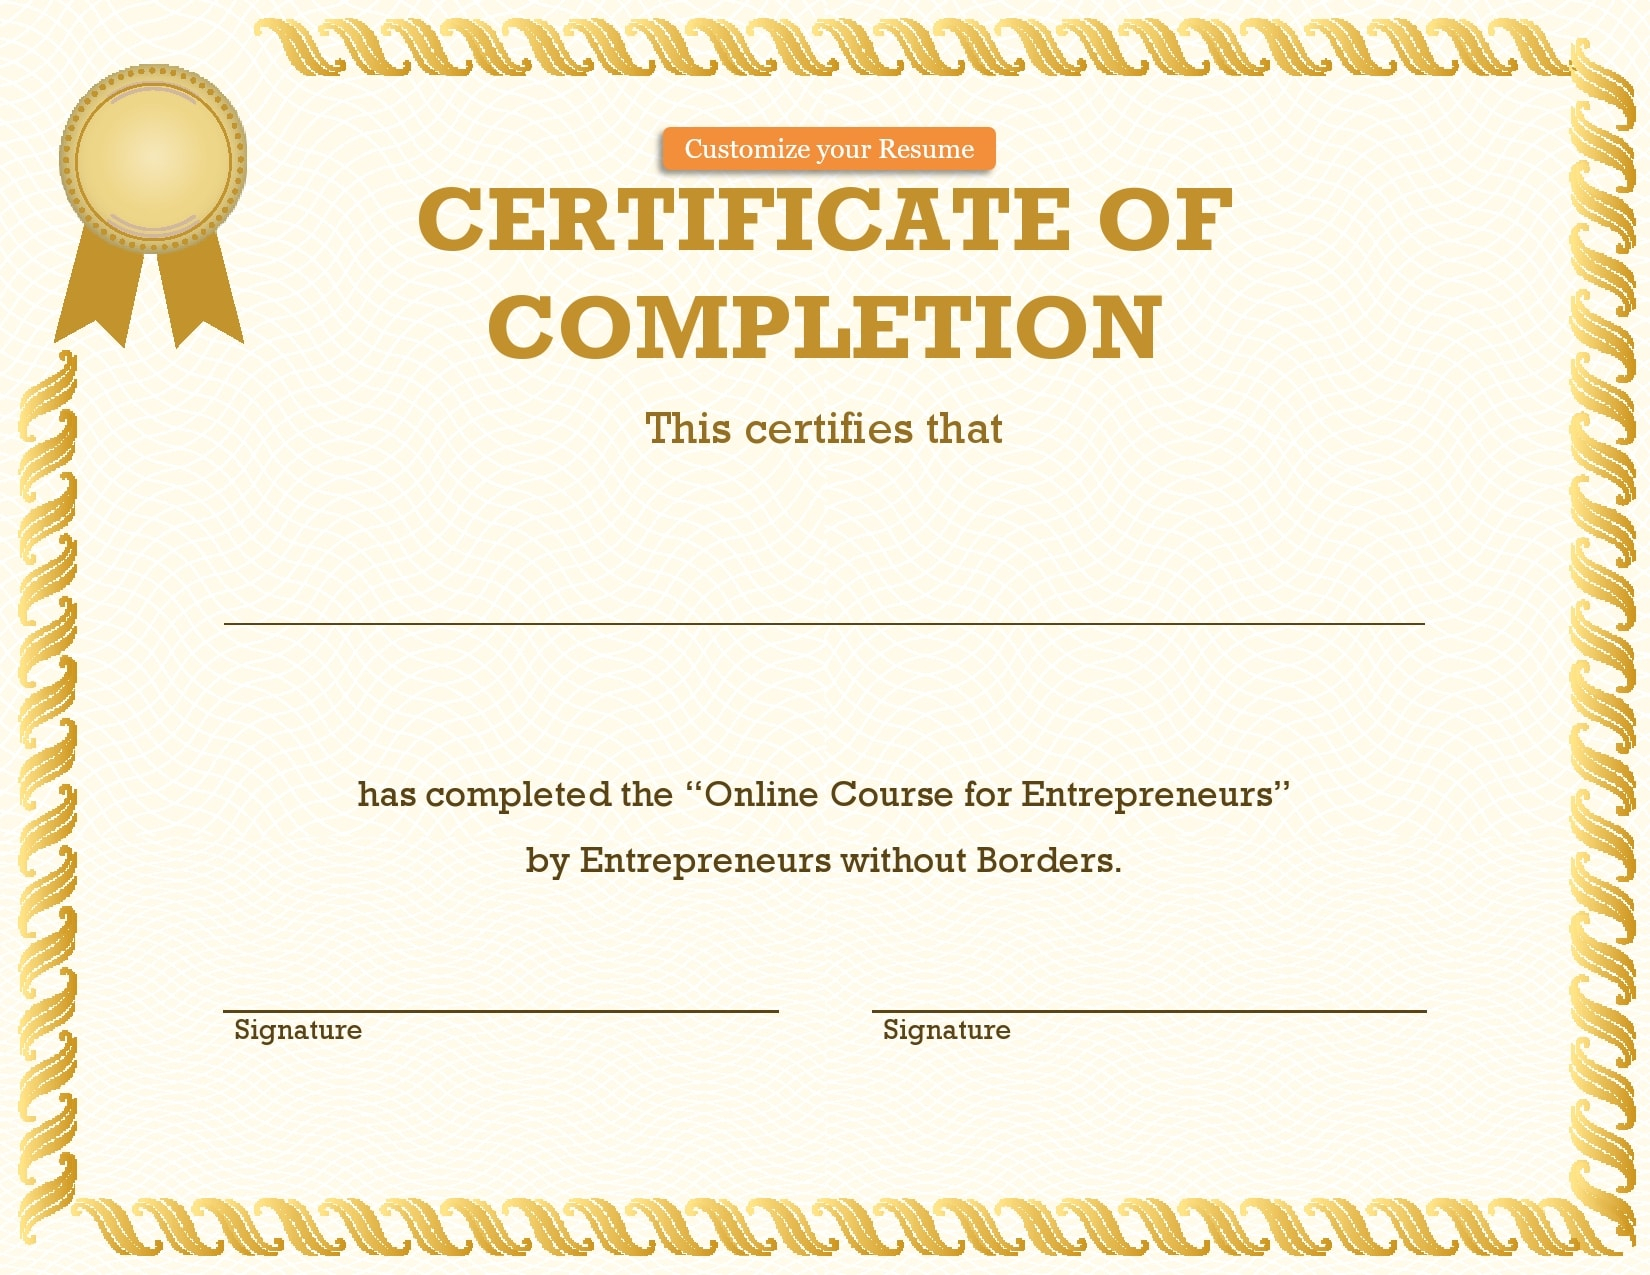 10 Great Certificate of Completion Templates (10% FREE) Regarding Certificate Of Completion Template Free Printable